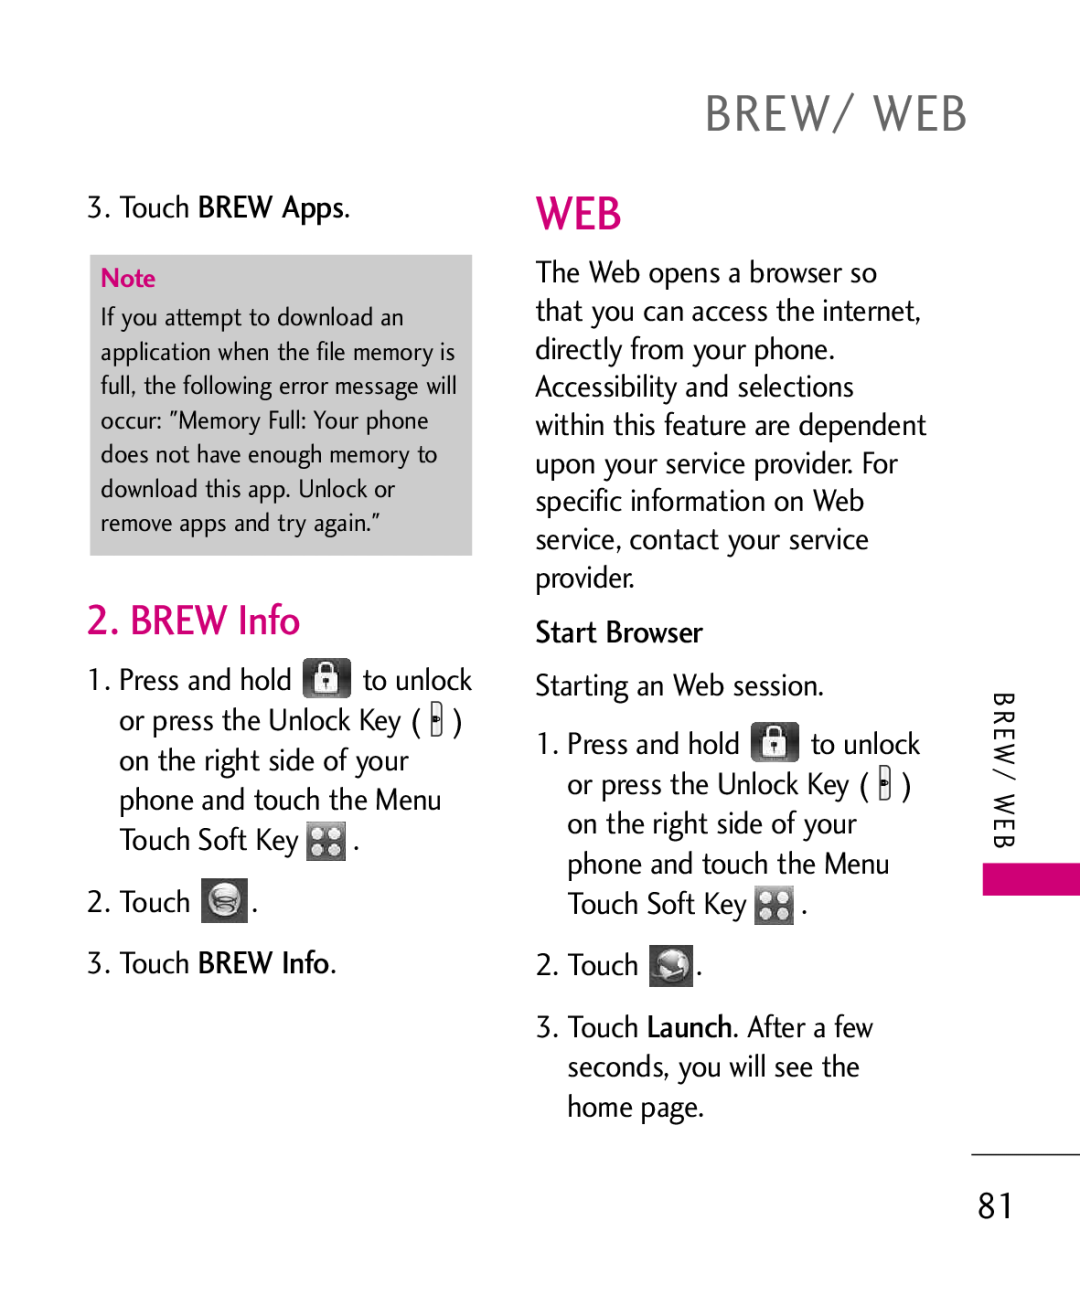 LG Electronics MMBB0379501 manual Brew/ Web, Touch BREW Apps, Touch BREW Info, Start Browser, Starting an Web session 